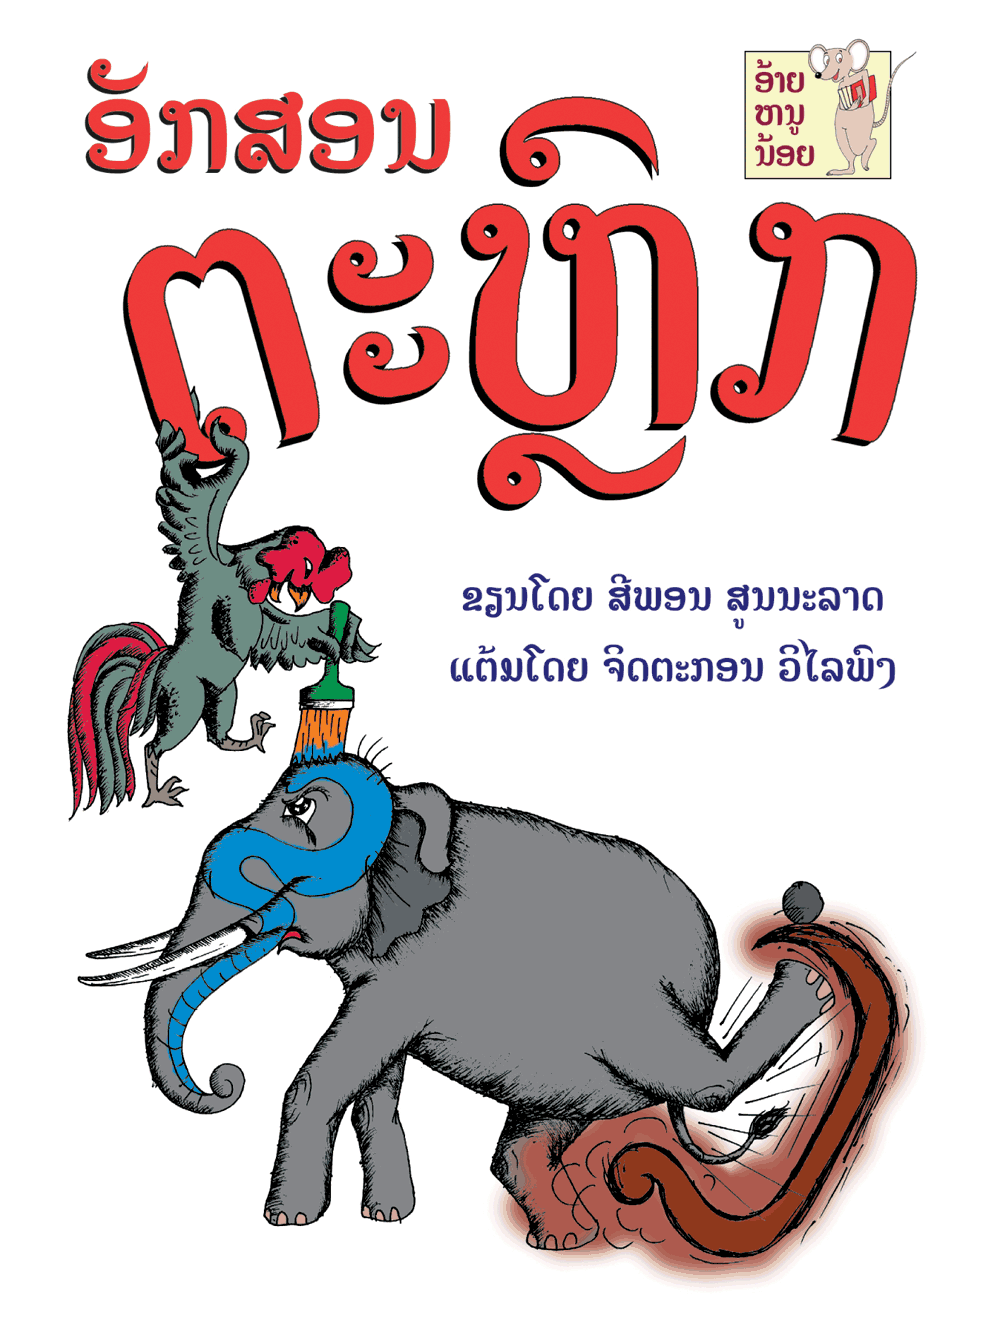 Funny Letters large book cover, published in Lao language